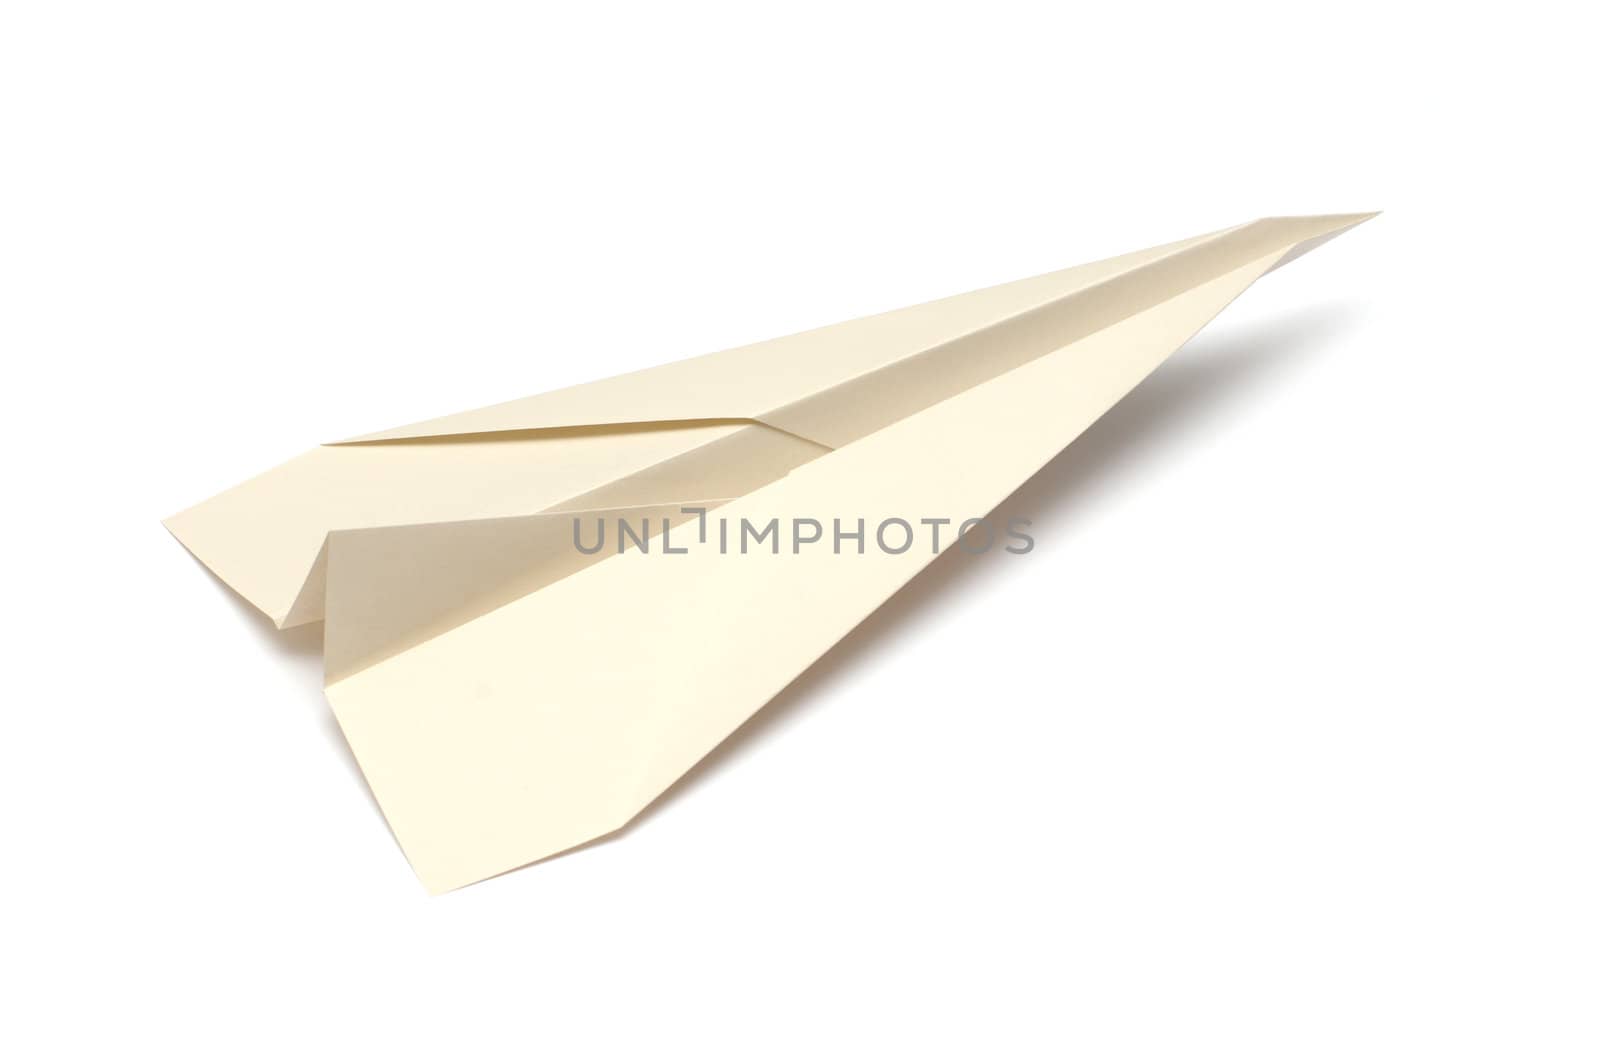 Paper airplane on white background by DNKSTUDIO